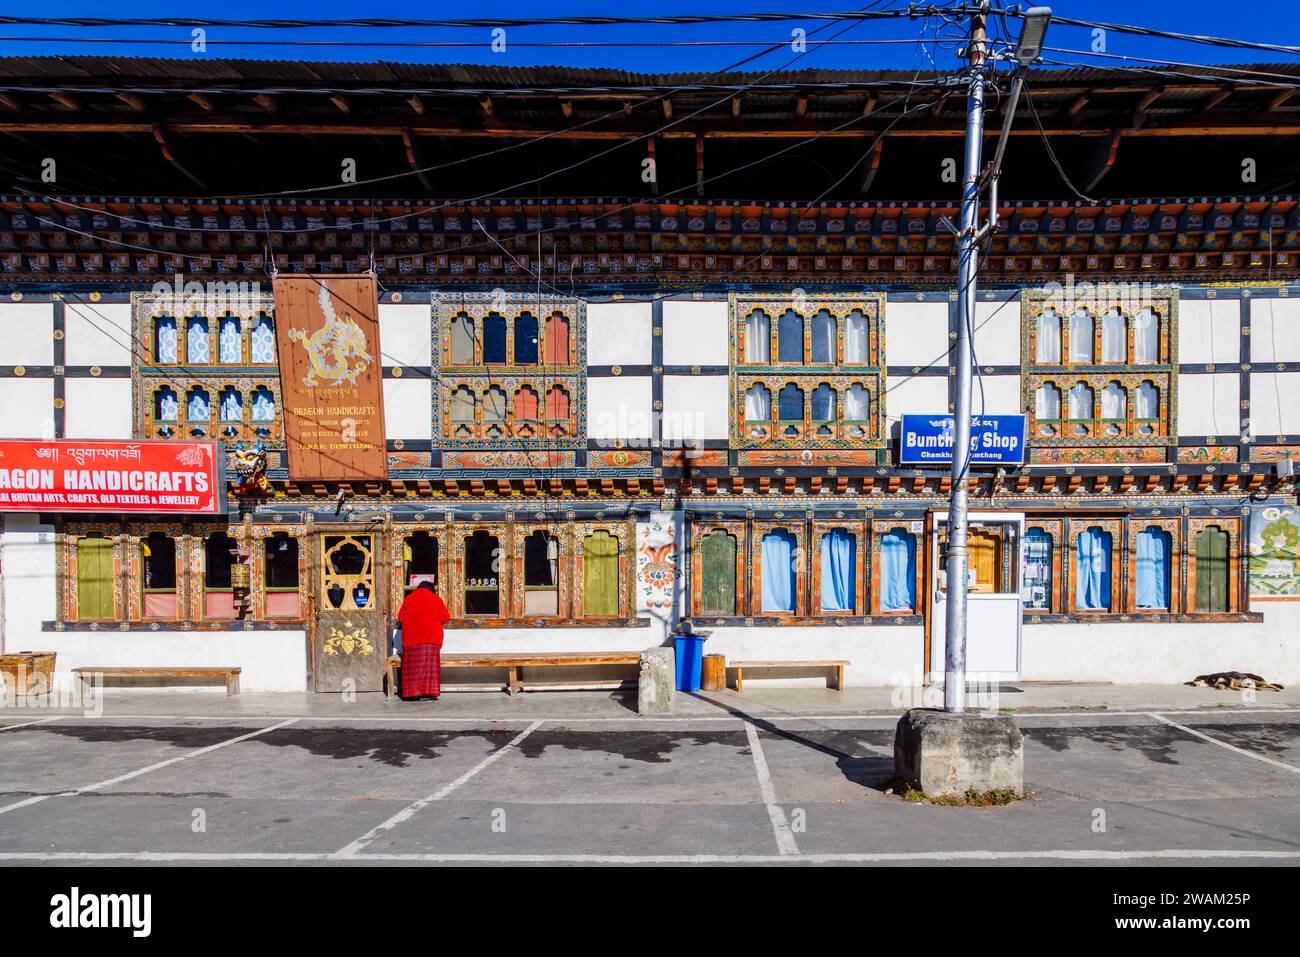 Local handicraft and general shops in Chamkhar Town, Bumthang, in the central-eastern region of Bhutan Stock Photo